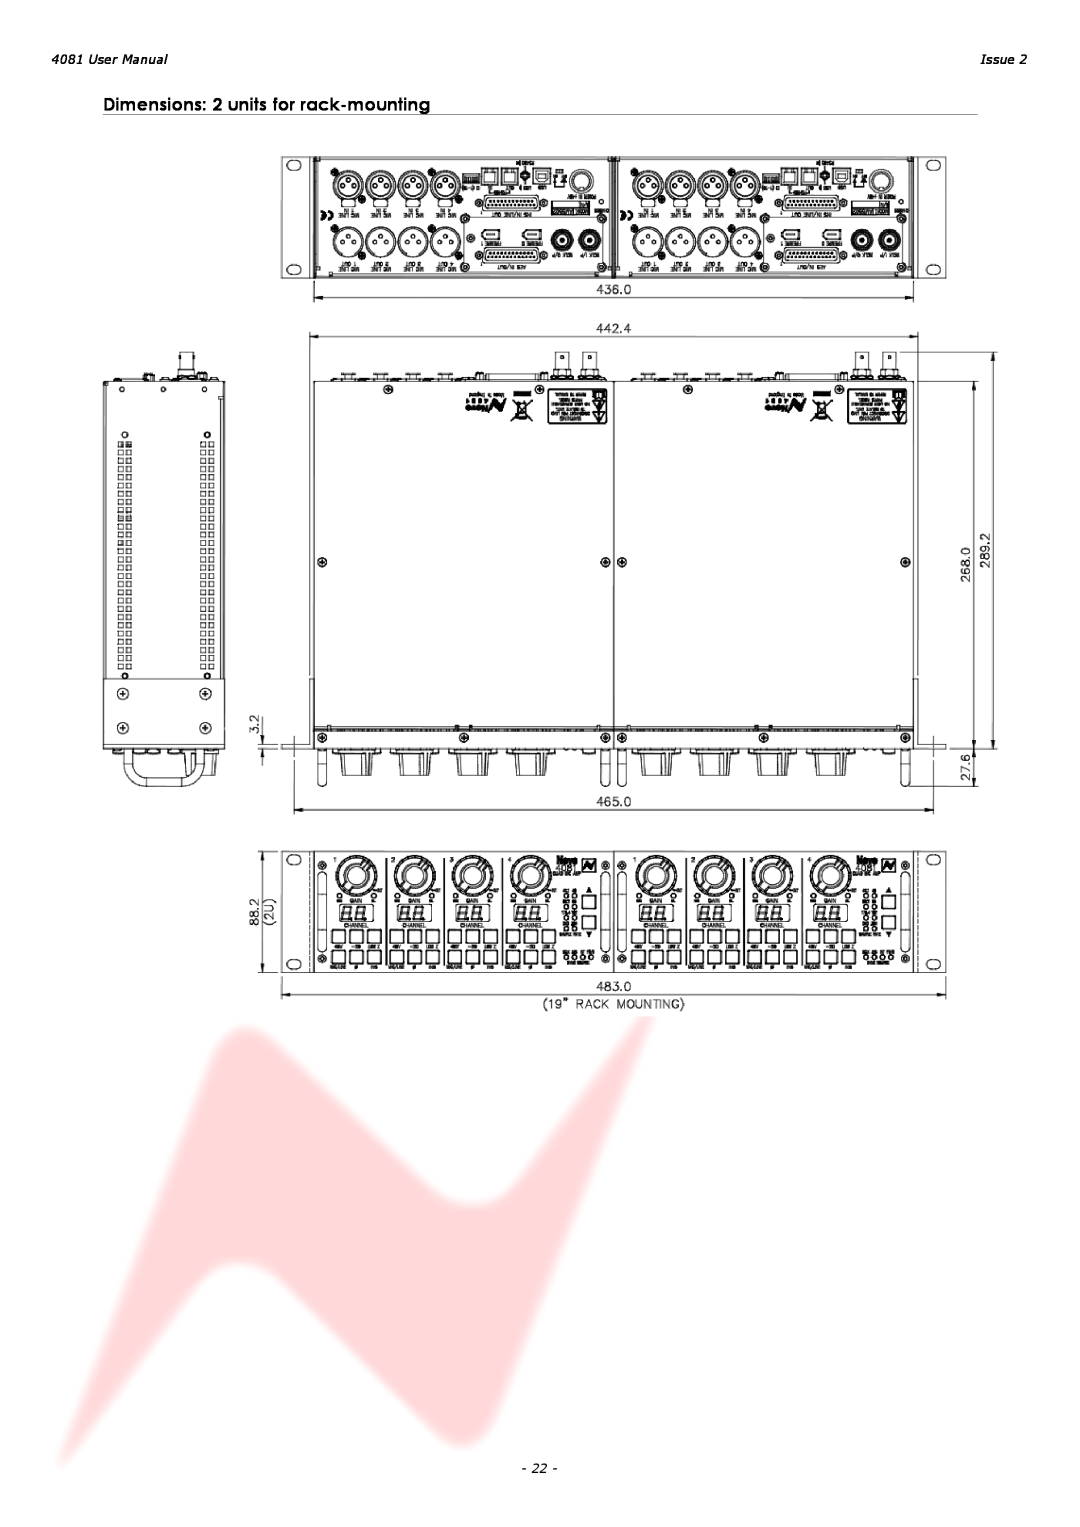 AMS 4081 user manual Dimensions 2 units for rack-mounting, Issue 